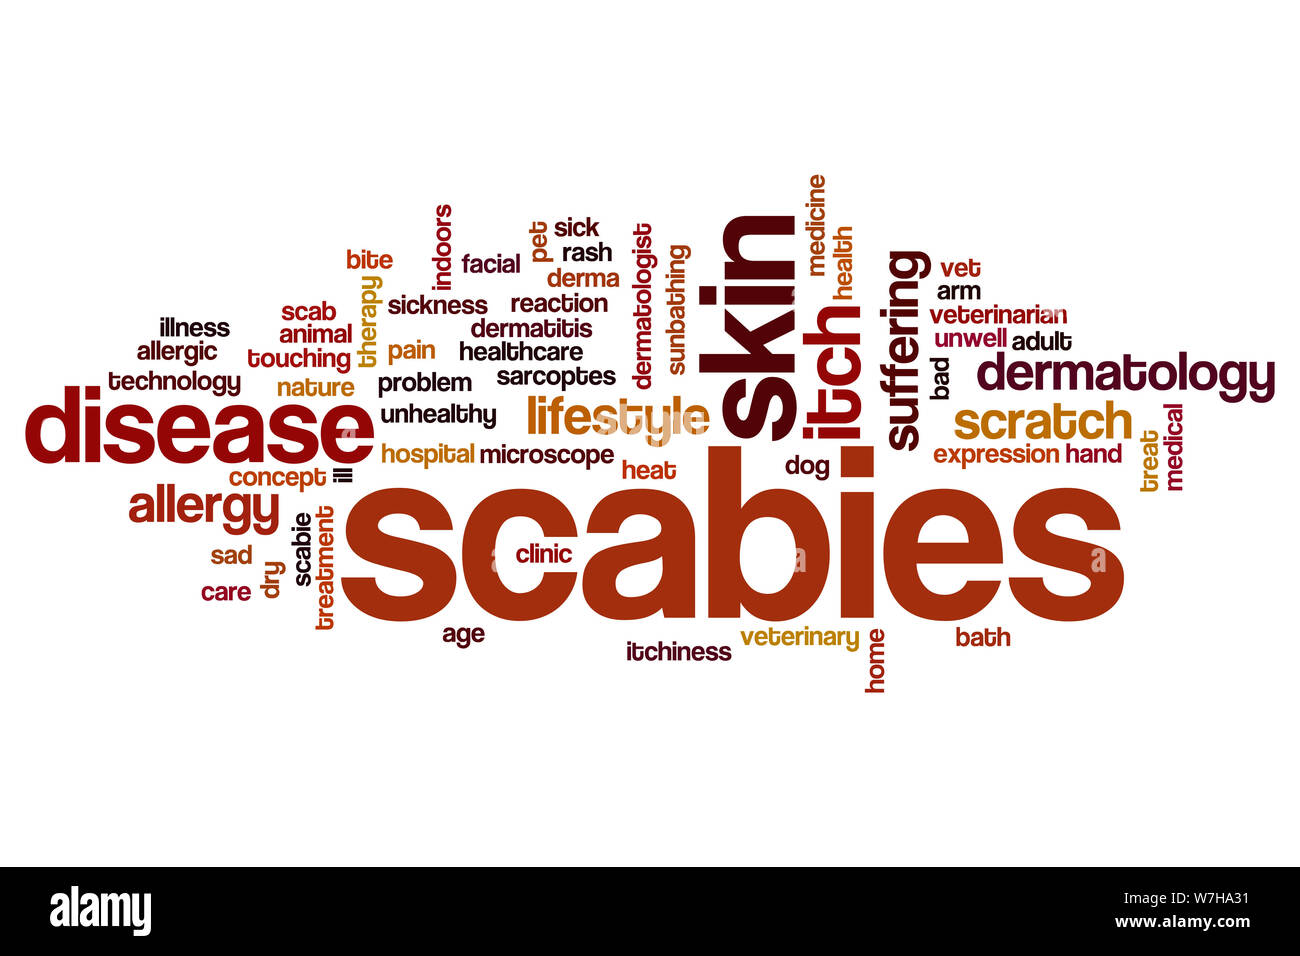 Scabies word cloud concept Stock Photo